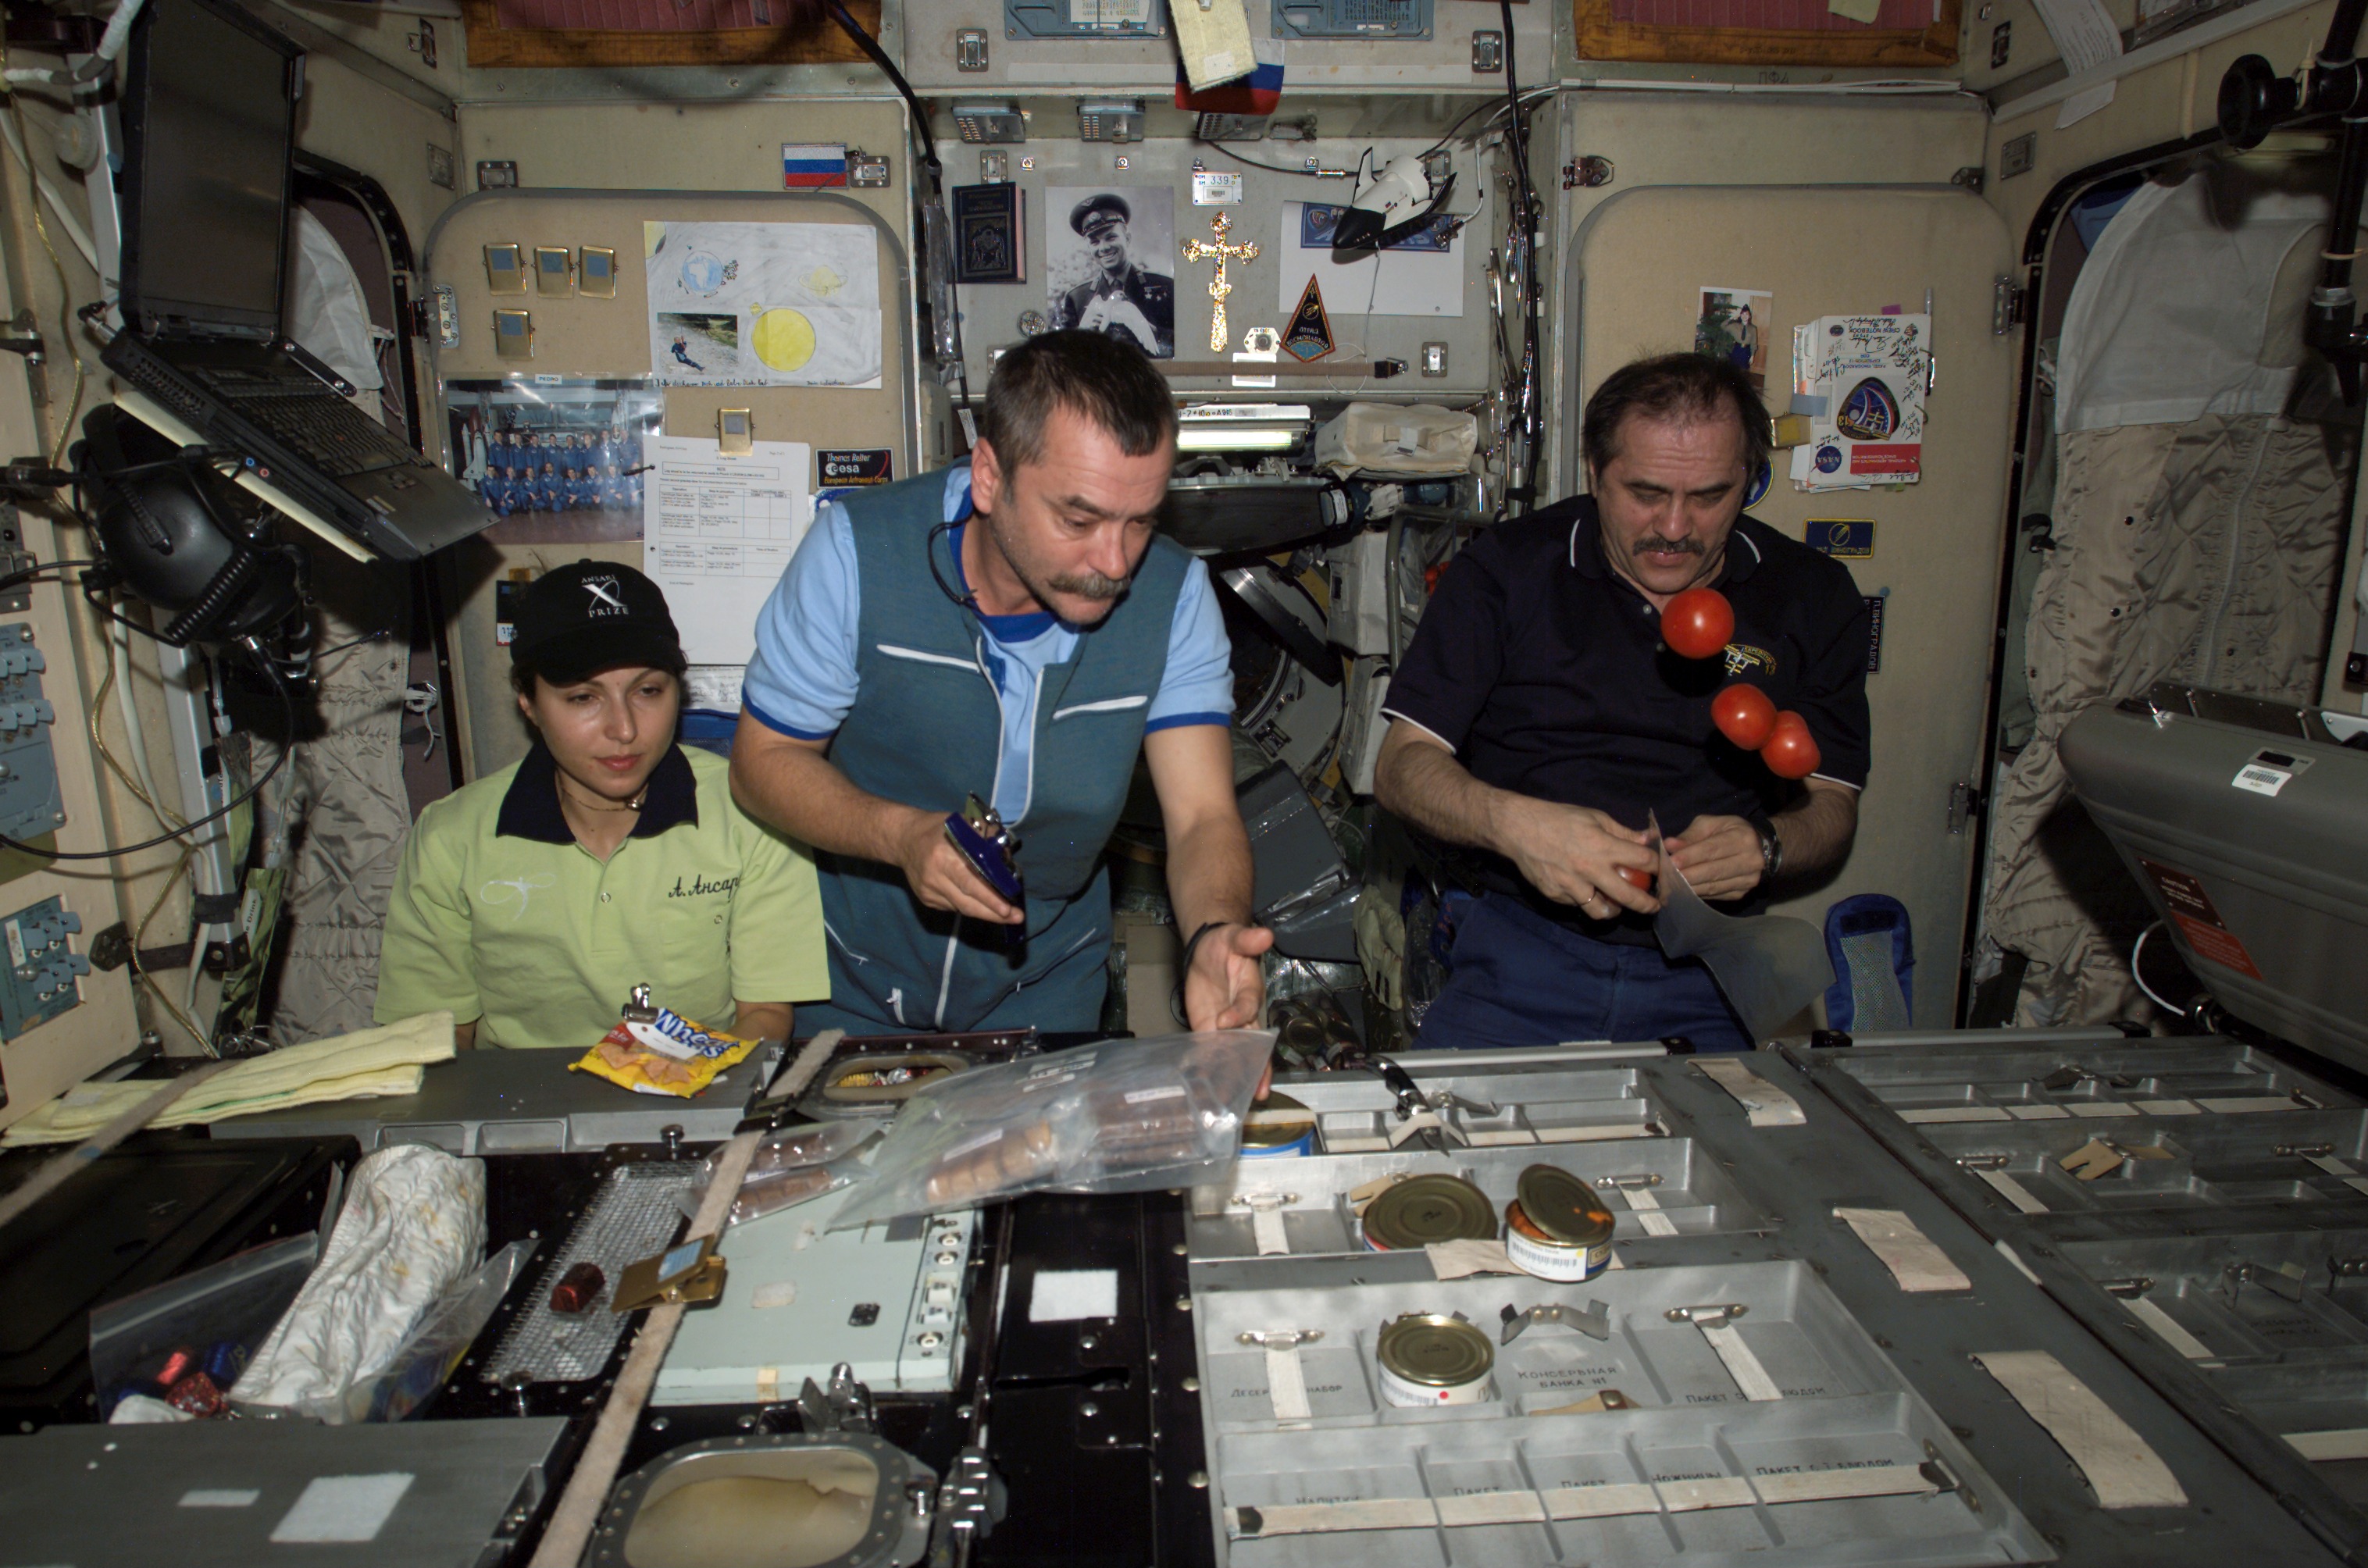 ISS-13 Anousheh Ansari, Mikhail Tyurin and Pavel Vinogradov prepare to eat a meal